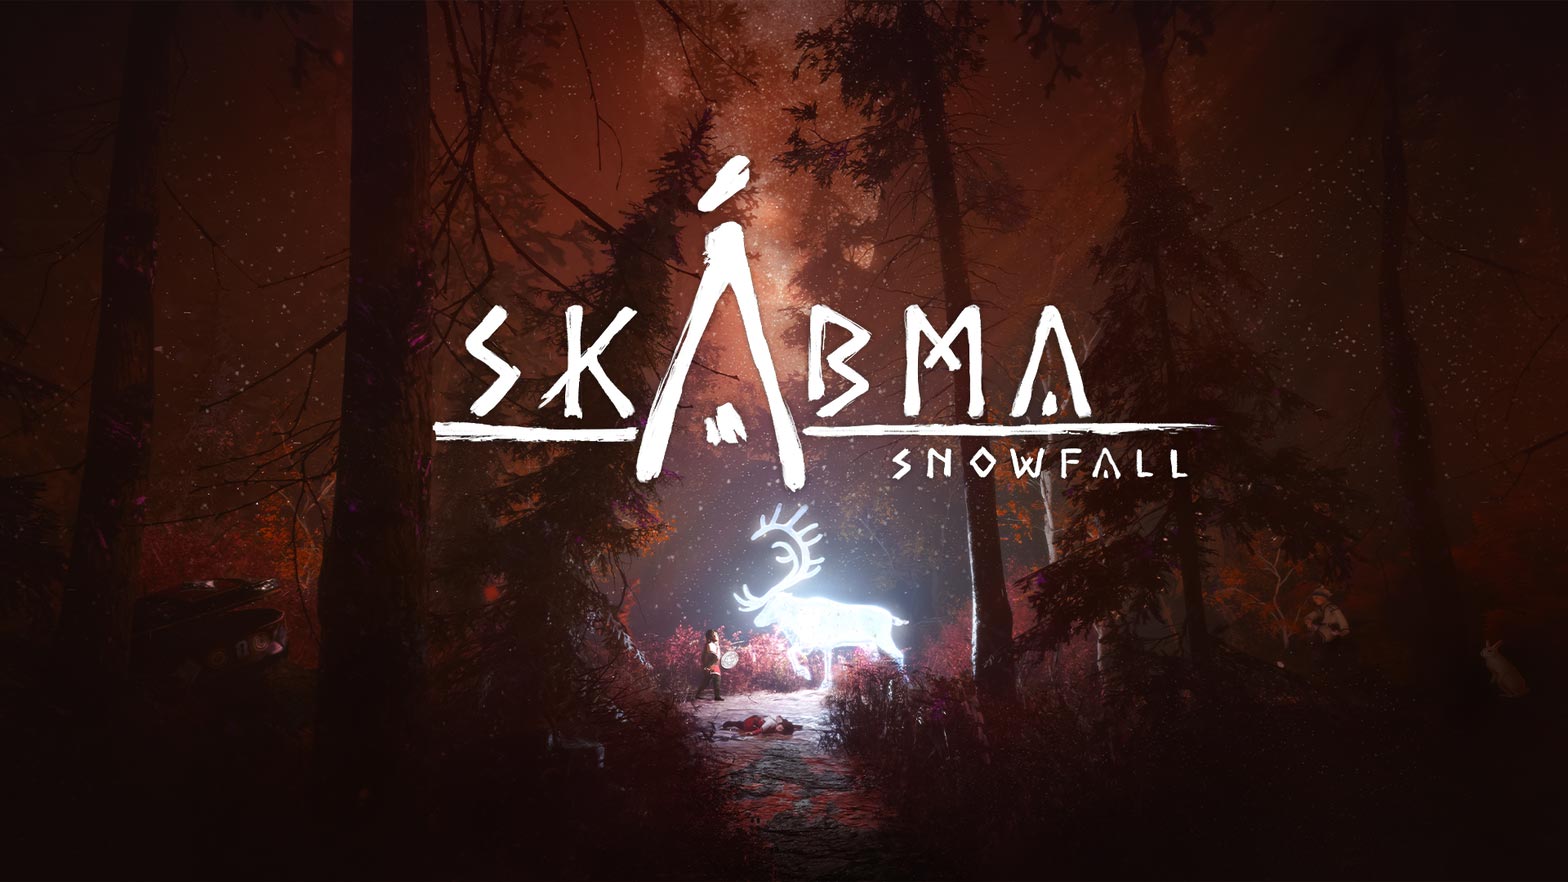 A glowing white deer and a person stand in the center of a darkly lit forest featuring the Skábma – Snowfall logo in white.